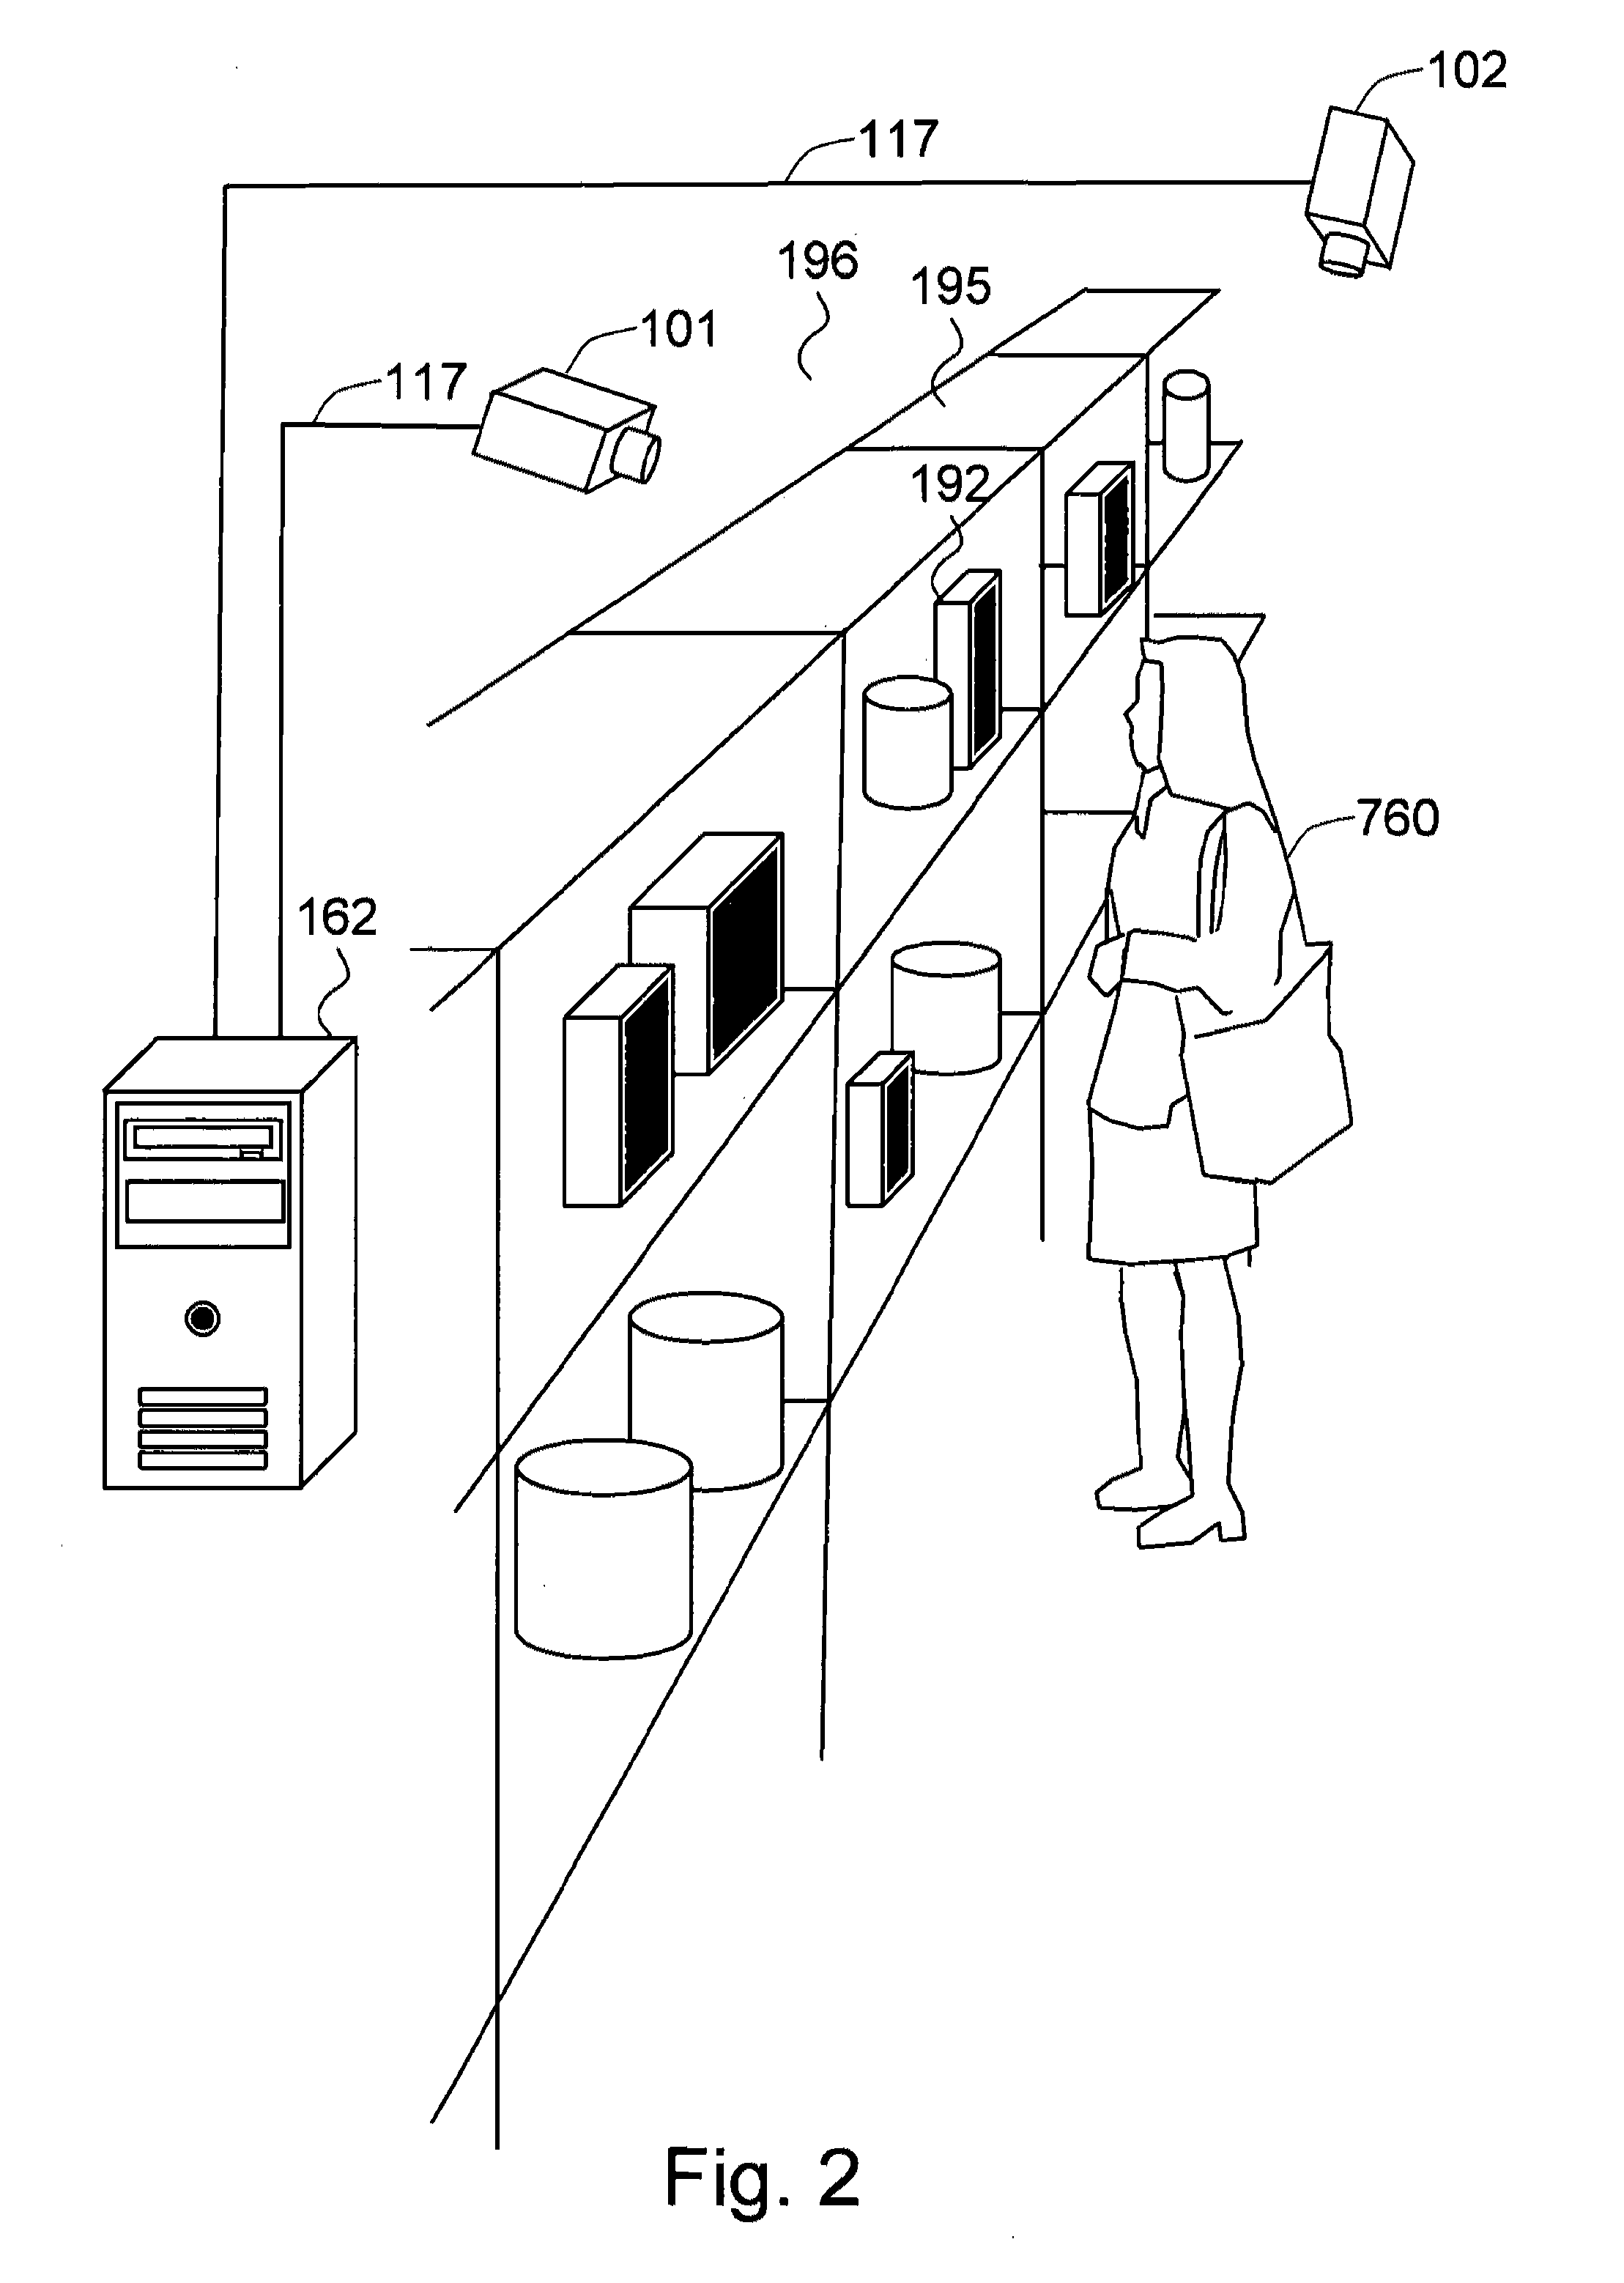 Method and system for measuring shopper response to products based on behavior and facial expression